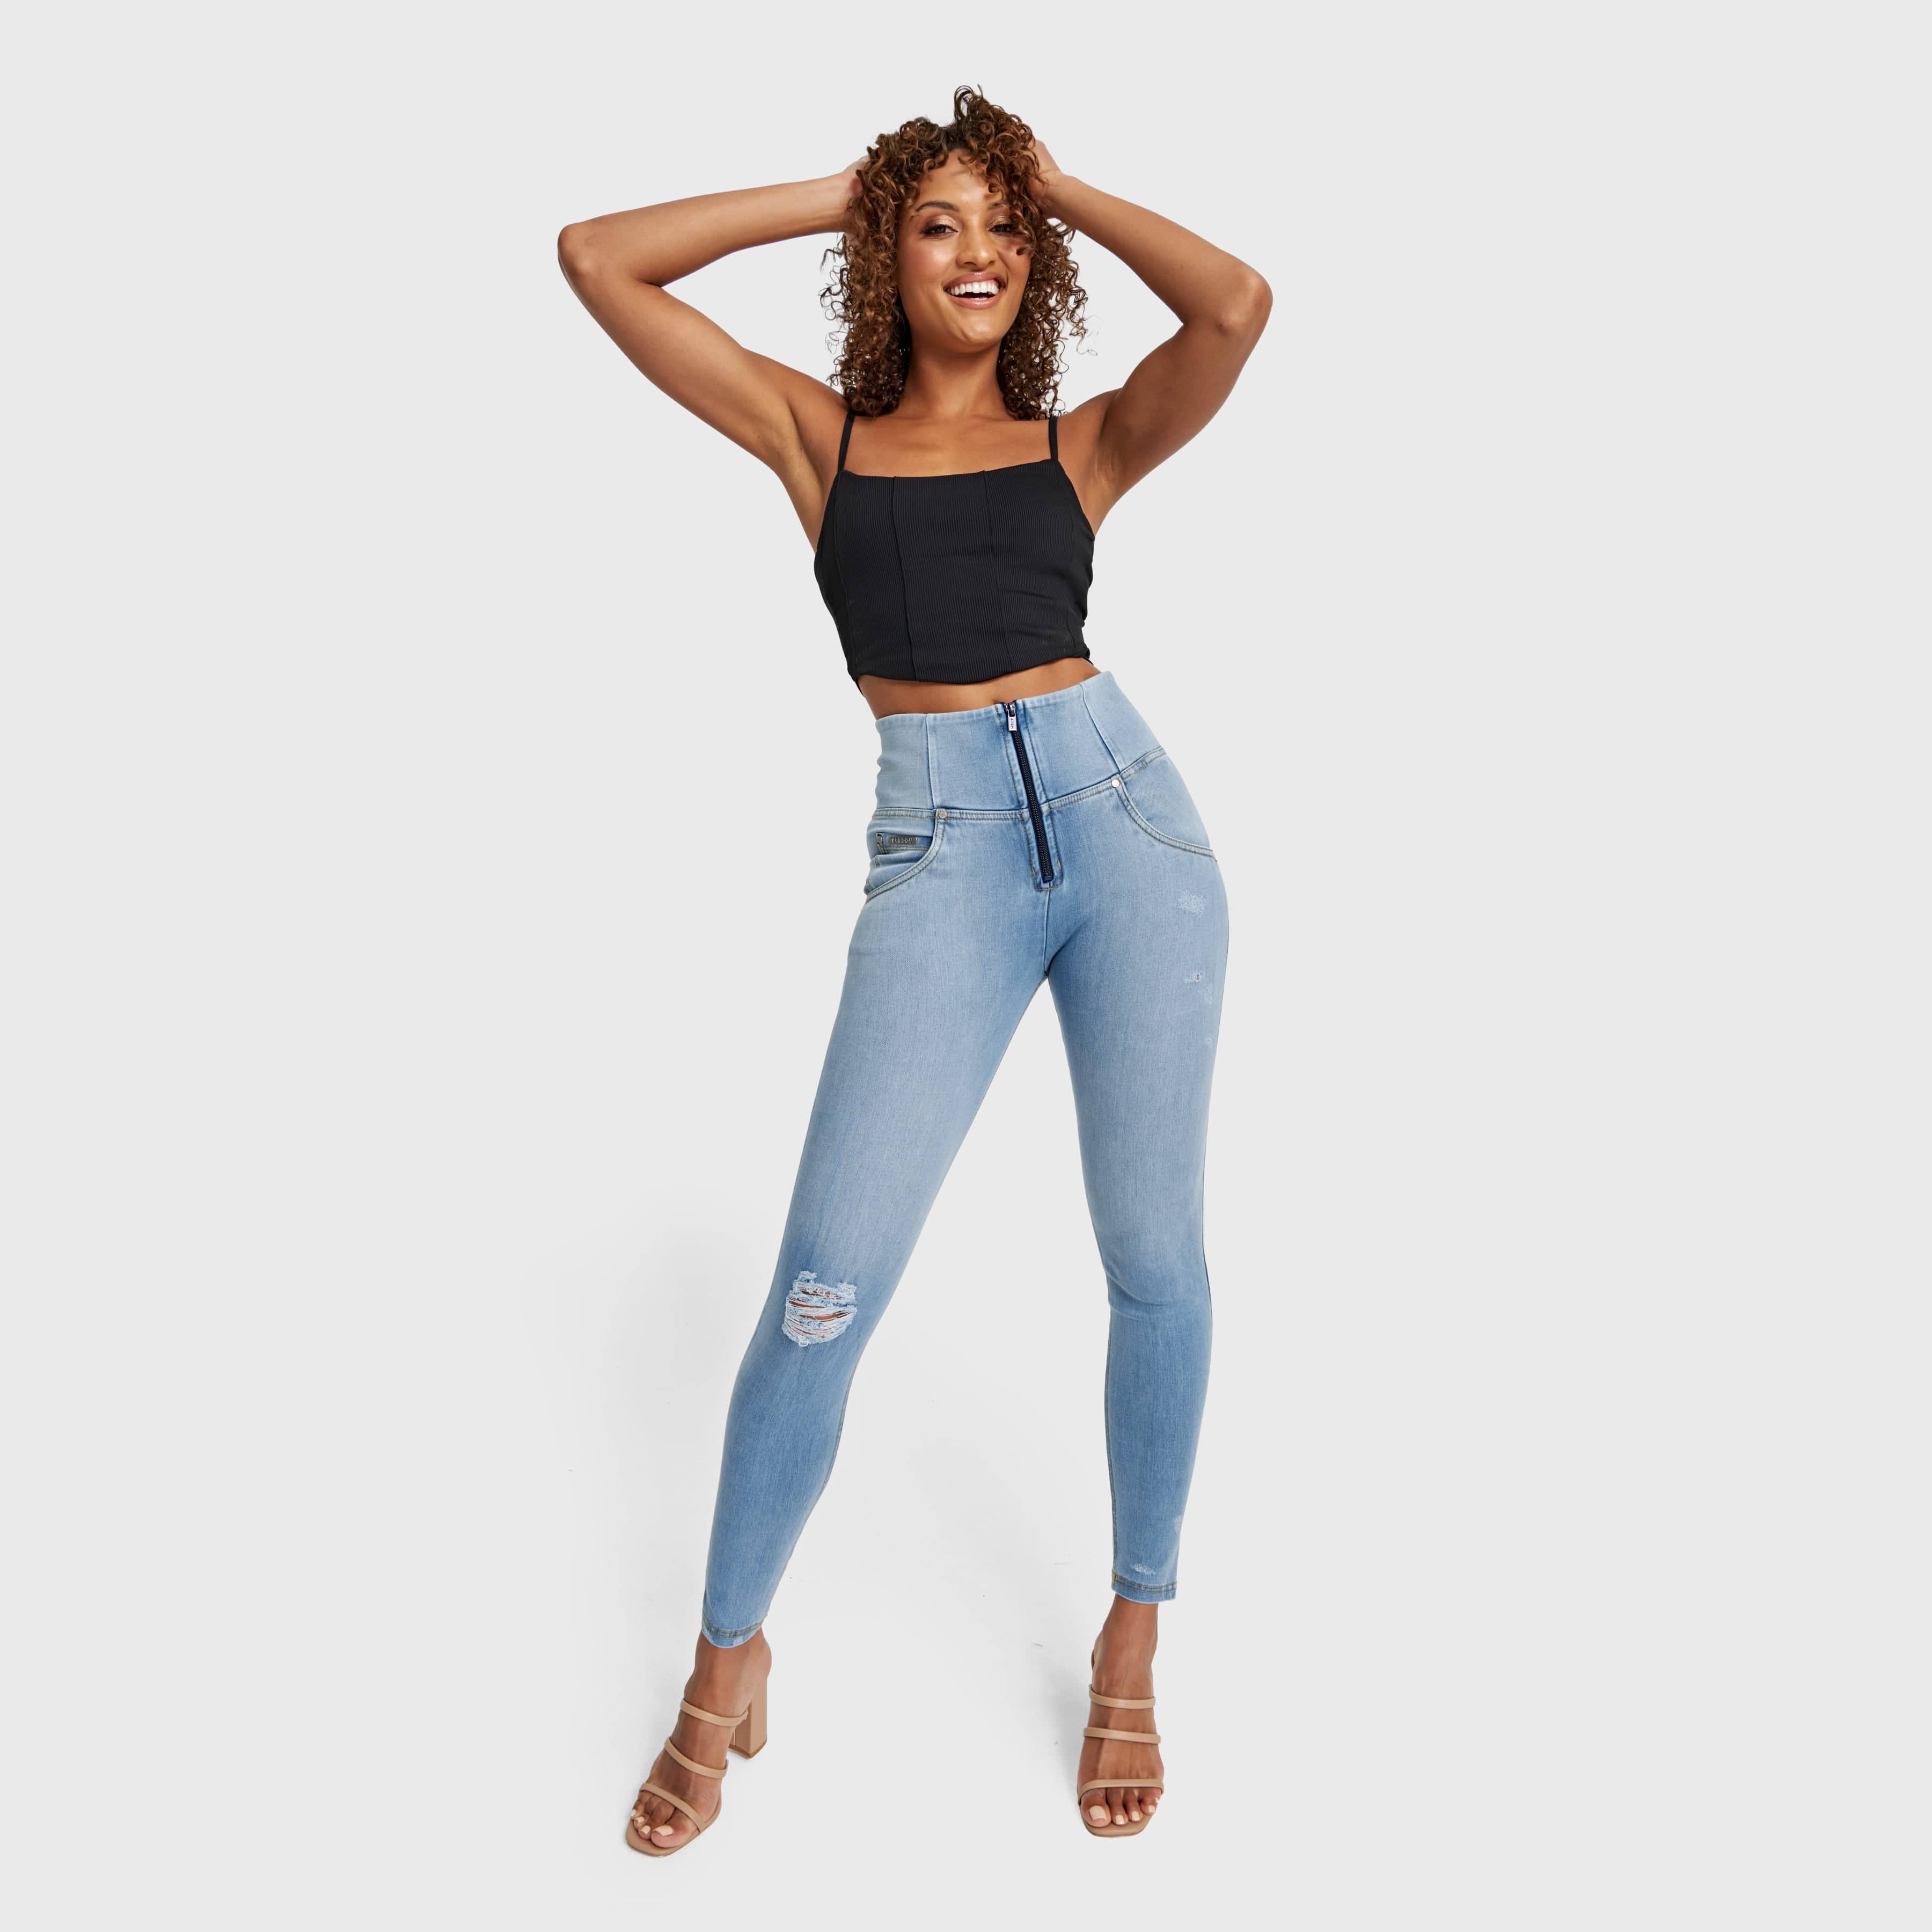 WR.UP® SNUG Distressed Jeans - High Waisted - Full Length - Light Blue + Yellow Stitching 3